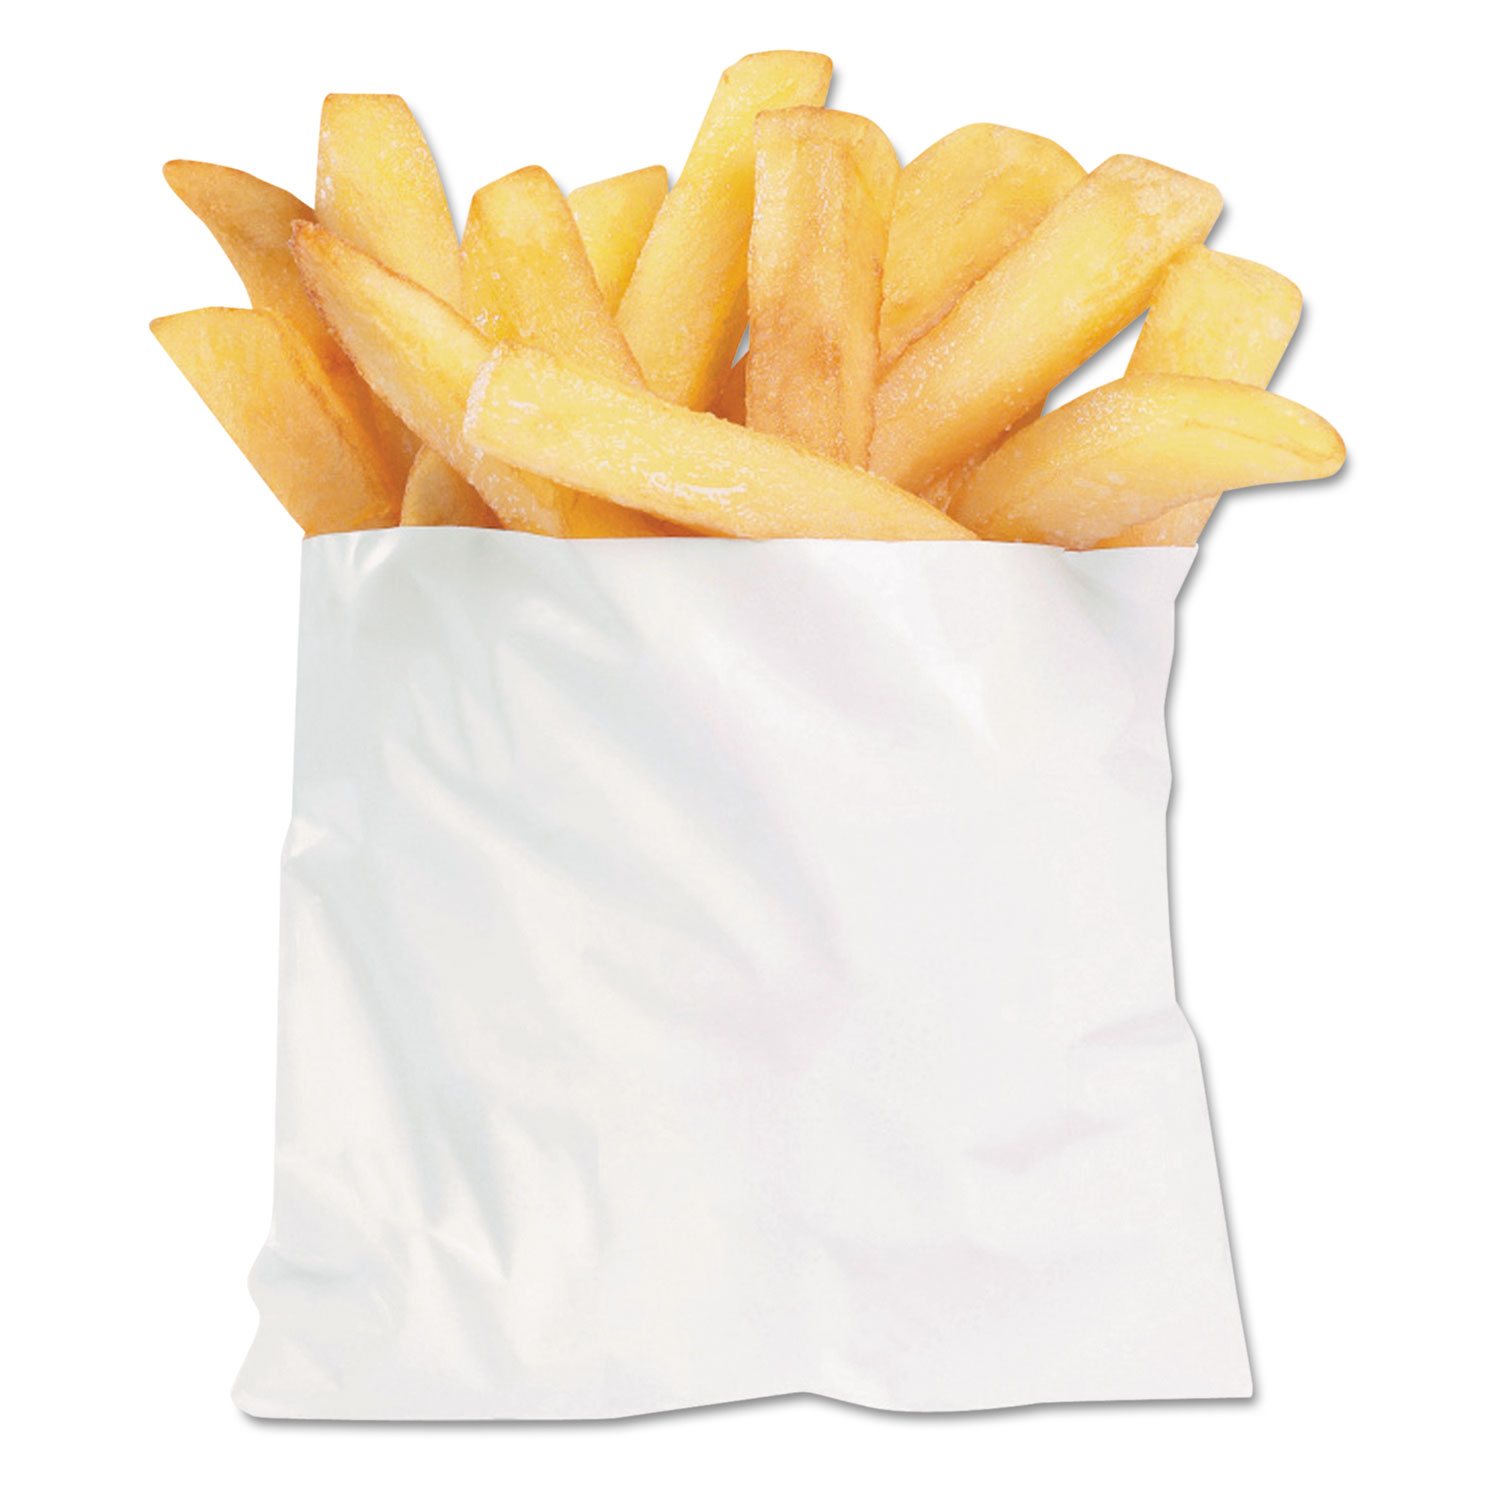 Fries inside a red bag isolated 27851374 PNG